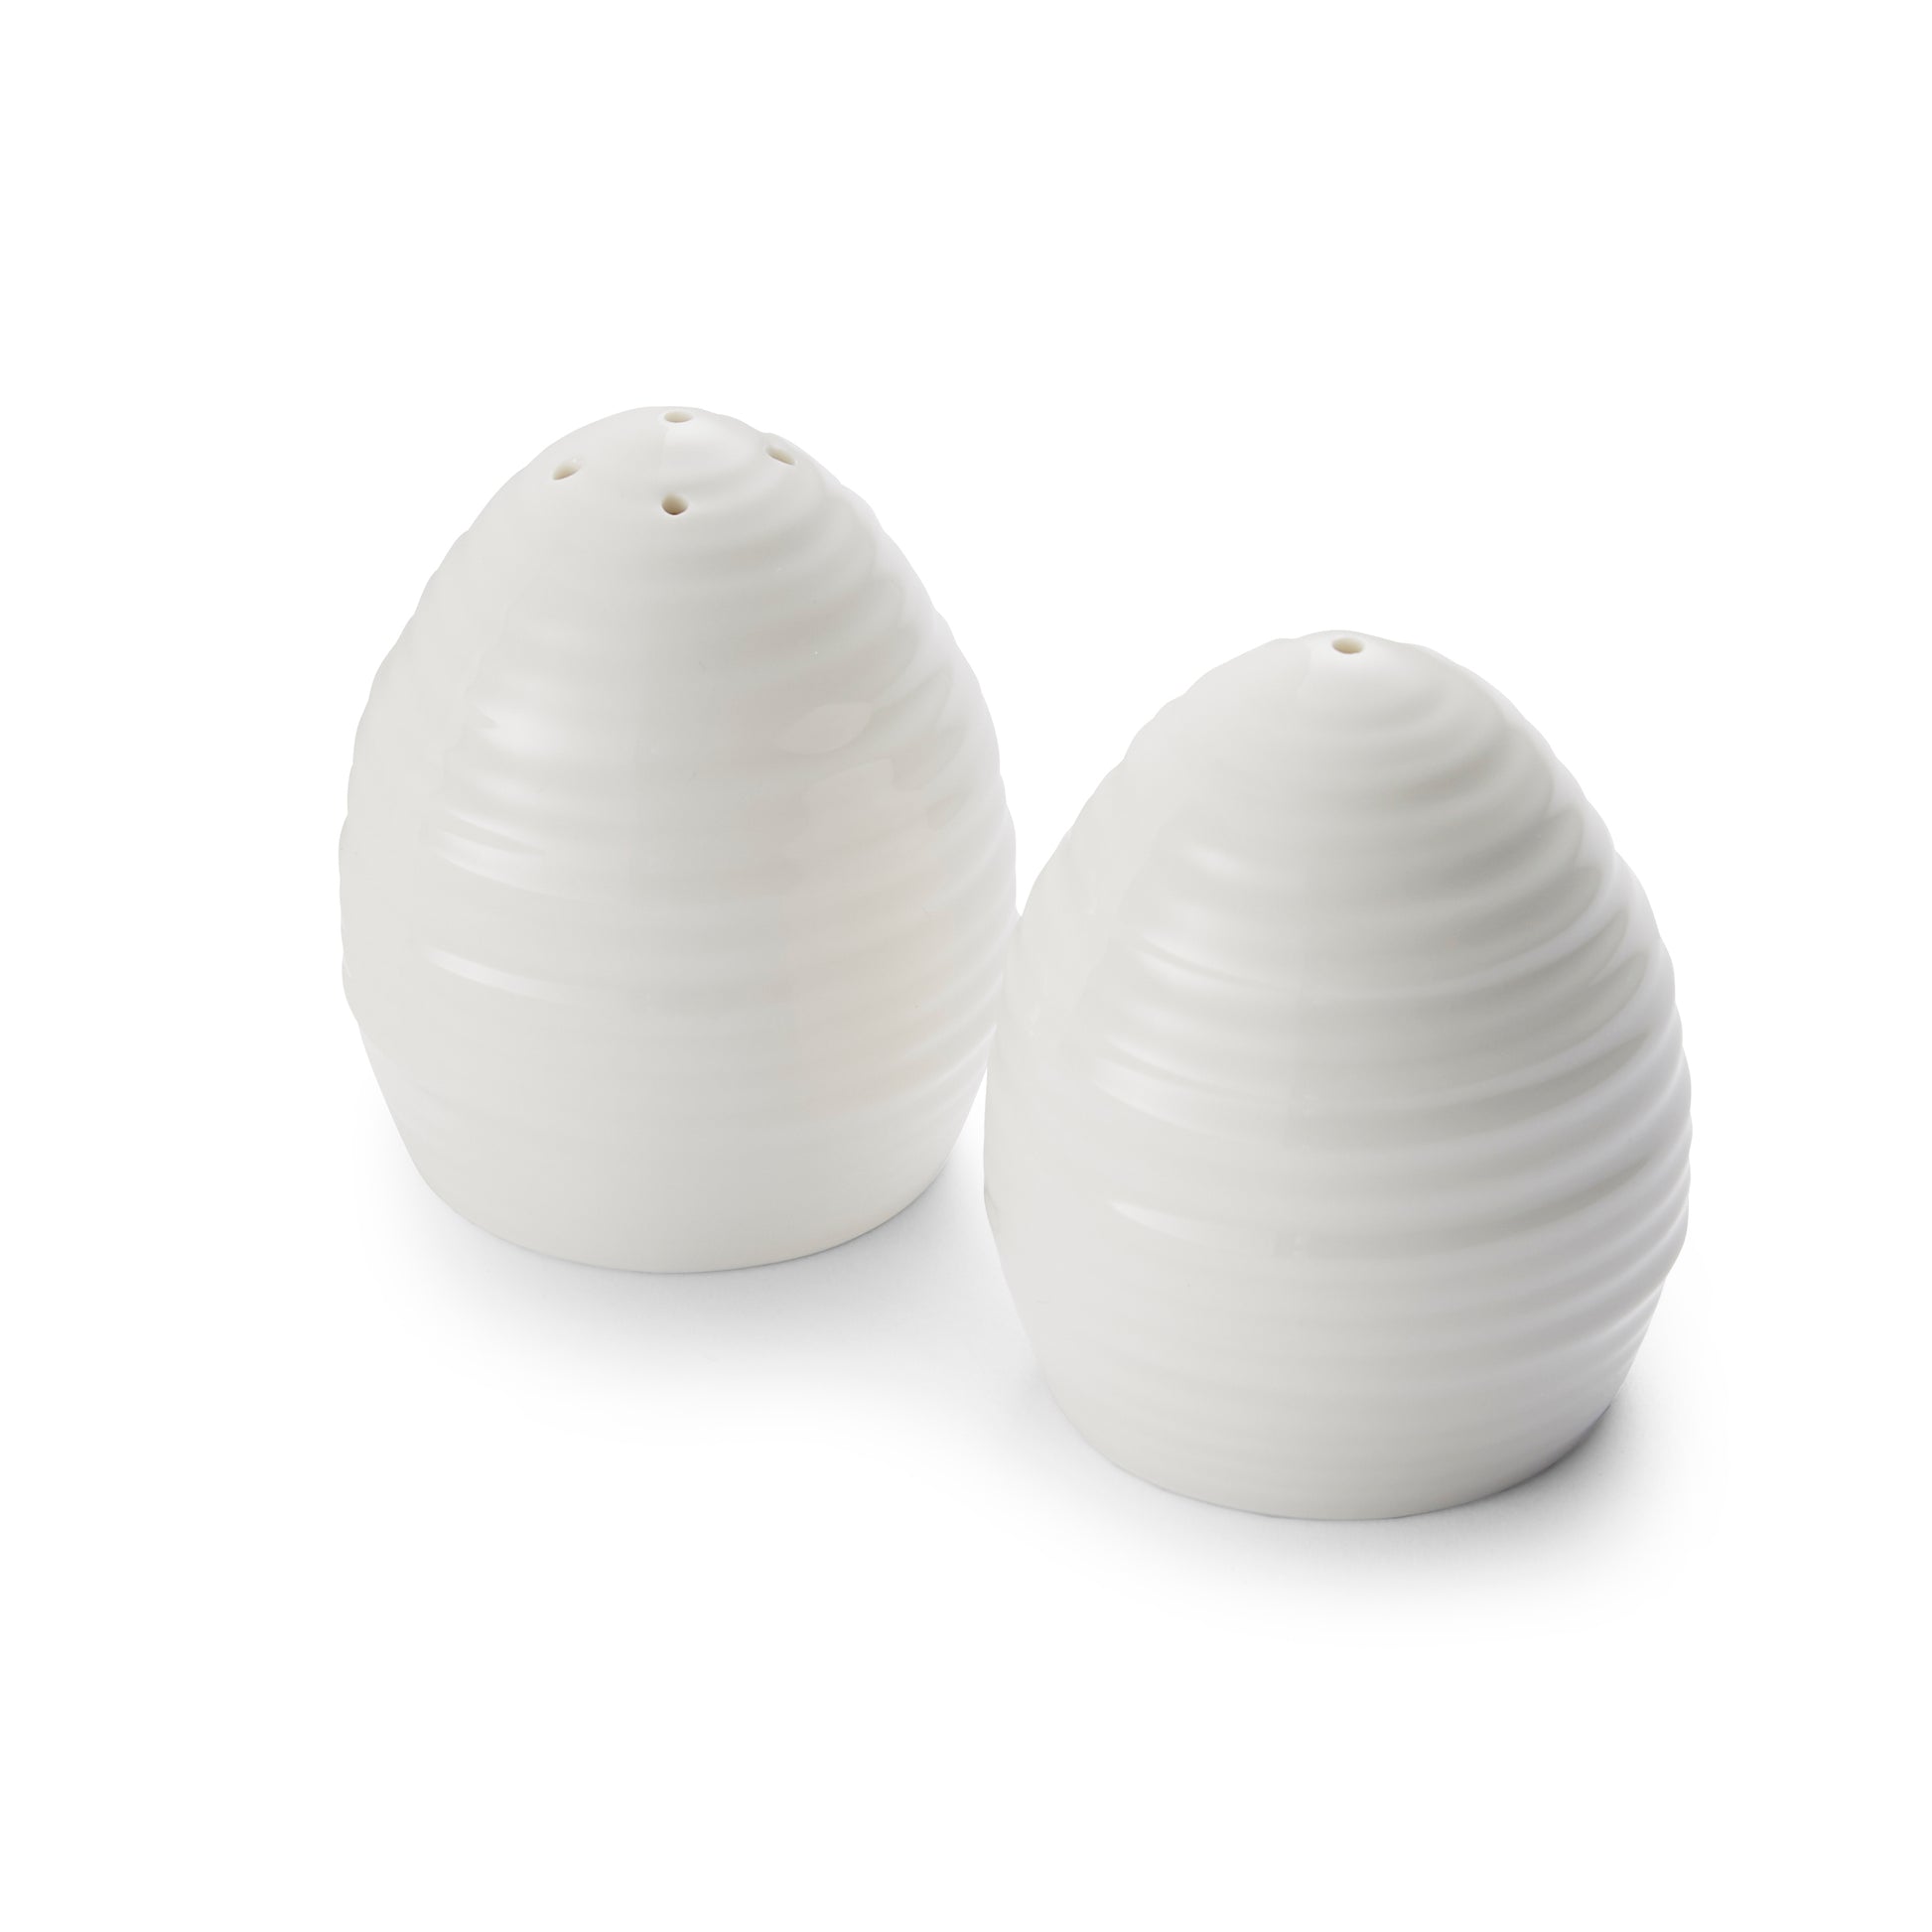 set of 2 salt and pepper shakers with an oval design.